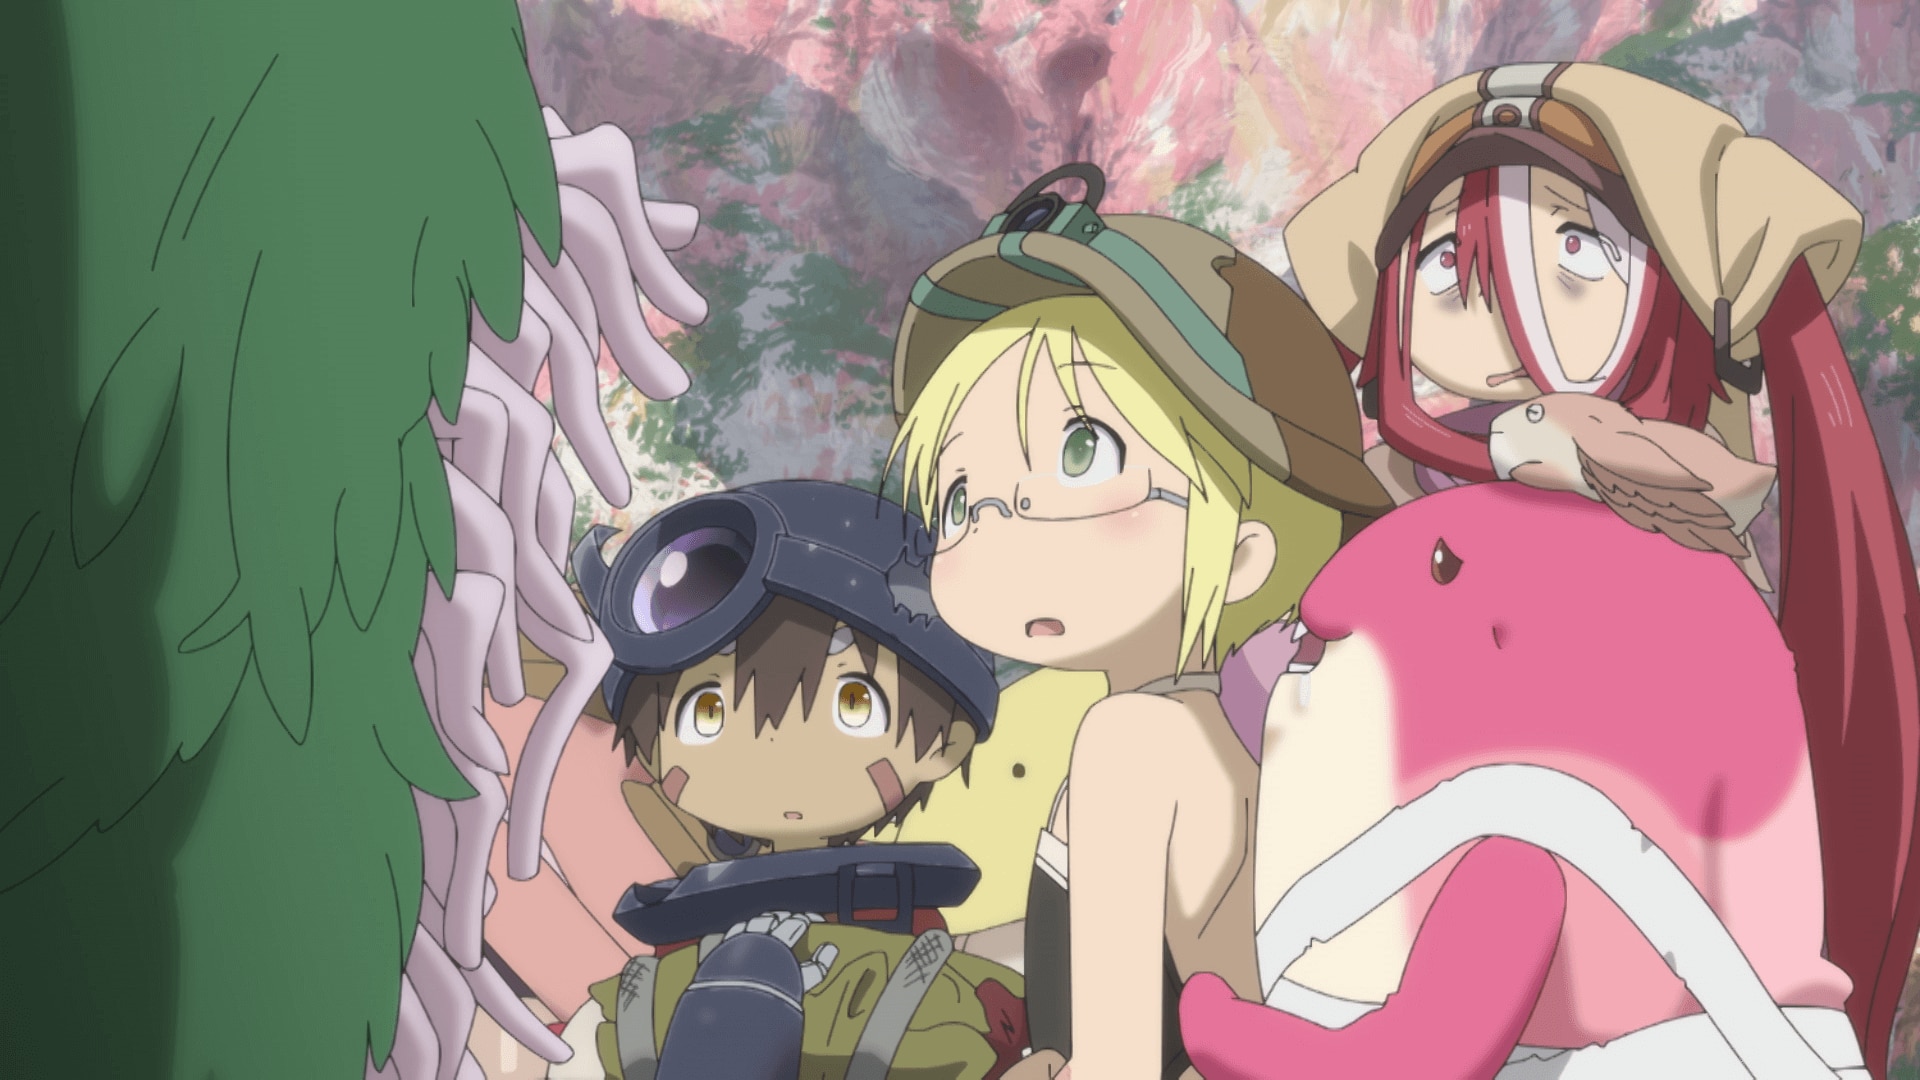 Made in Abyss Season 2 Episode 2 Recap: Capital of the Unreturned